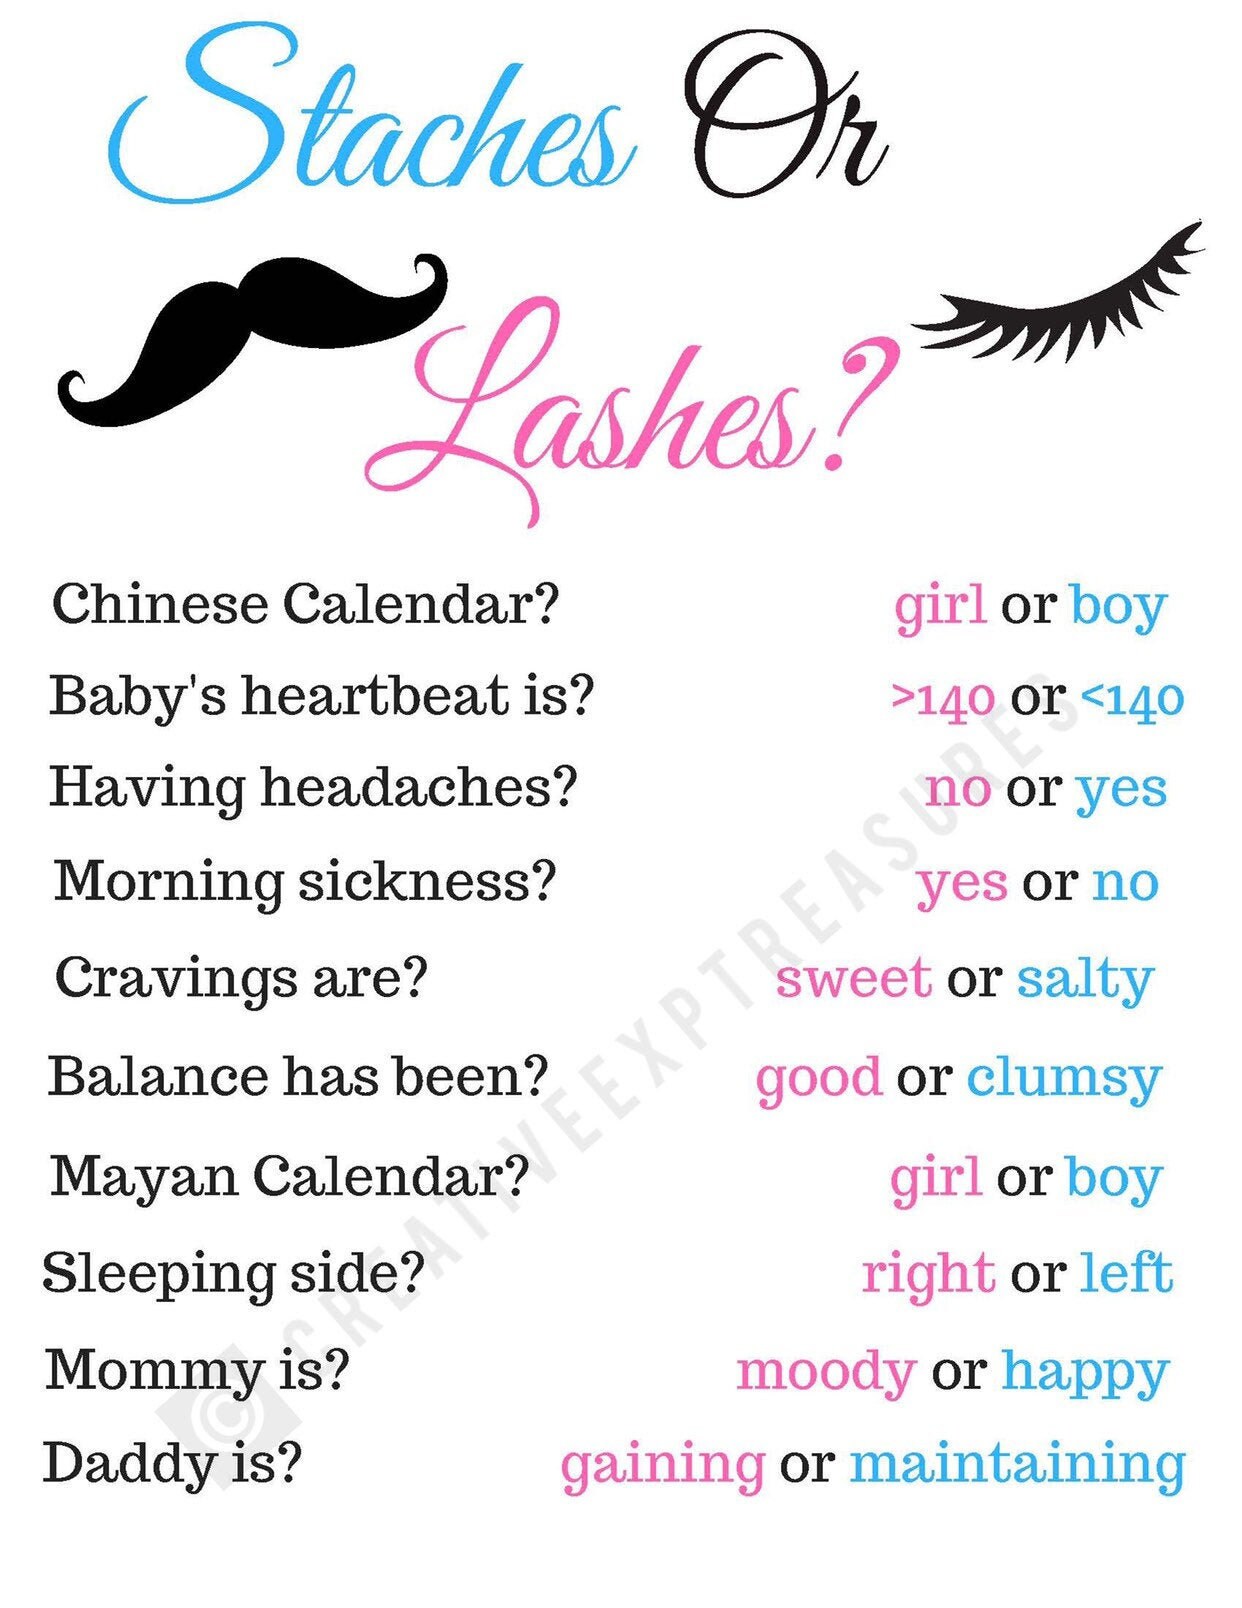 Old Wives Tales Gender Prediction Staches or Lashes Theme